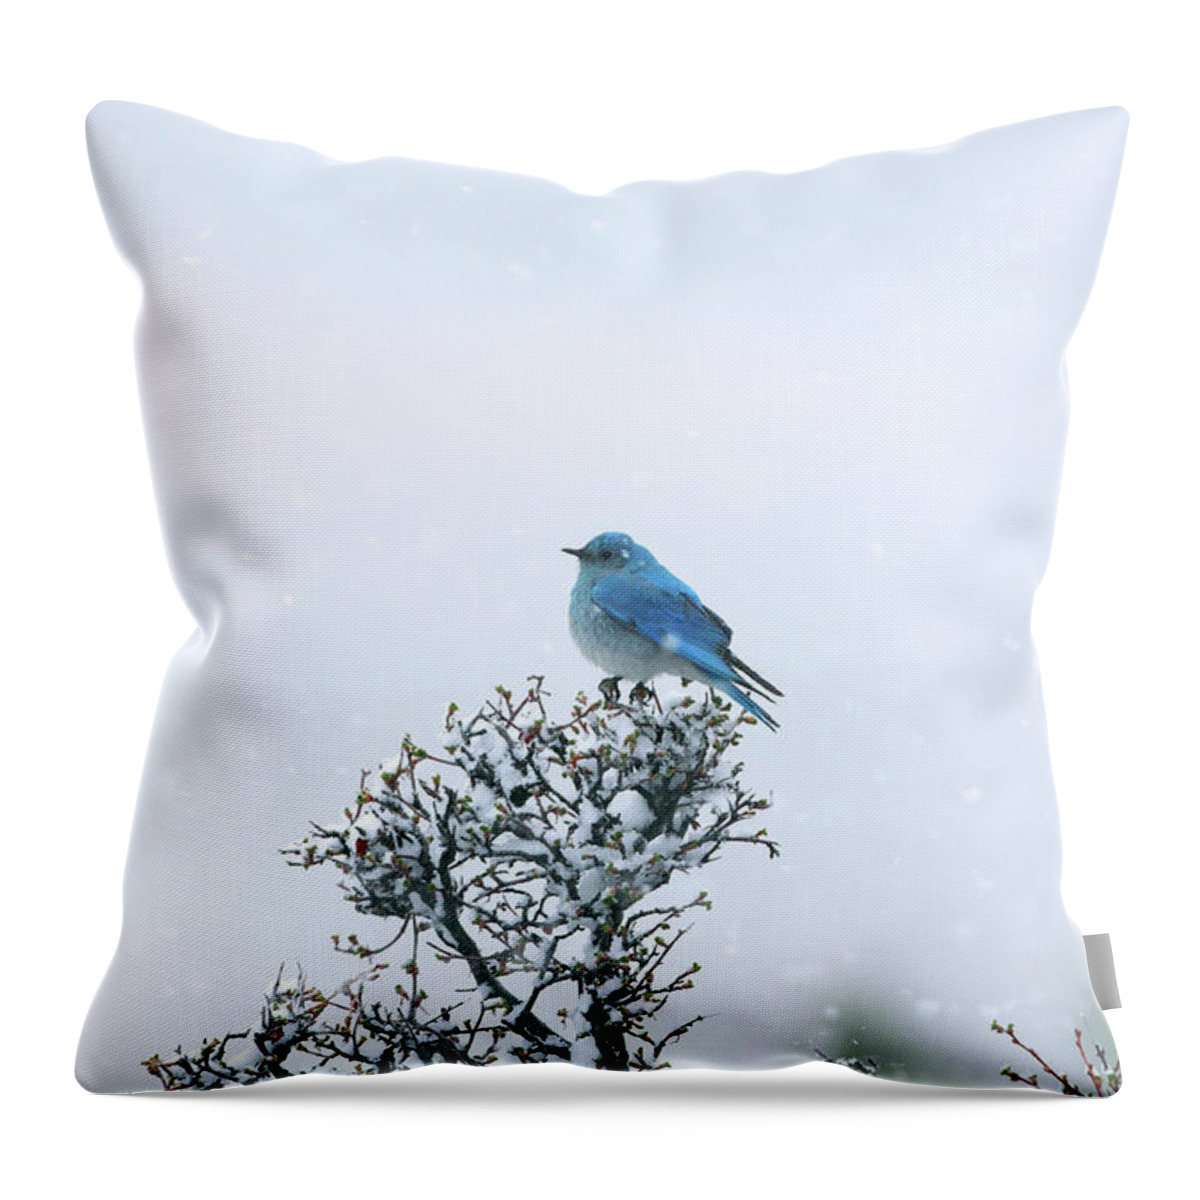 Snow Throw Pillow featuring the photograph Mountain Bluebird In Snow by Pat Gaines